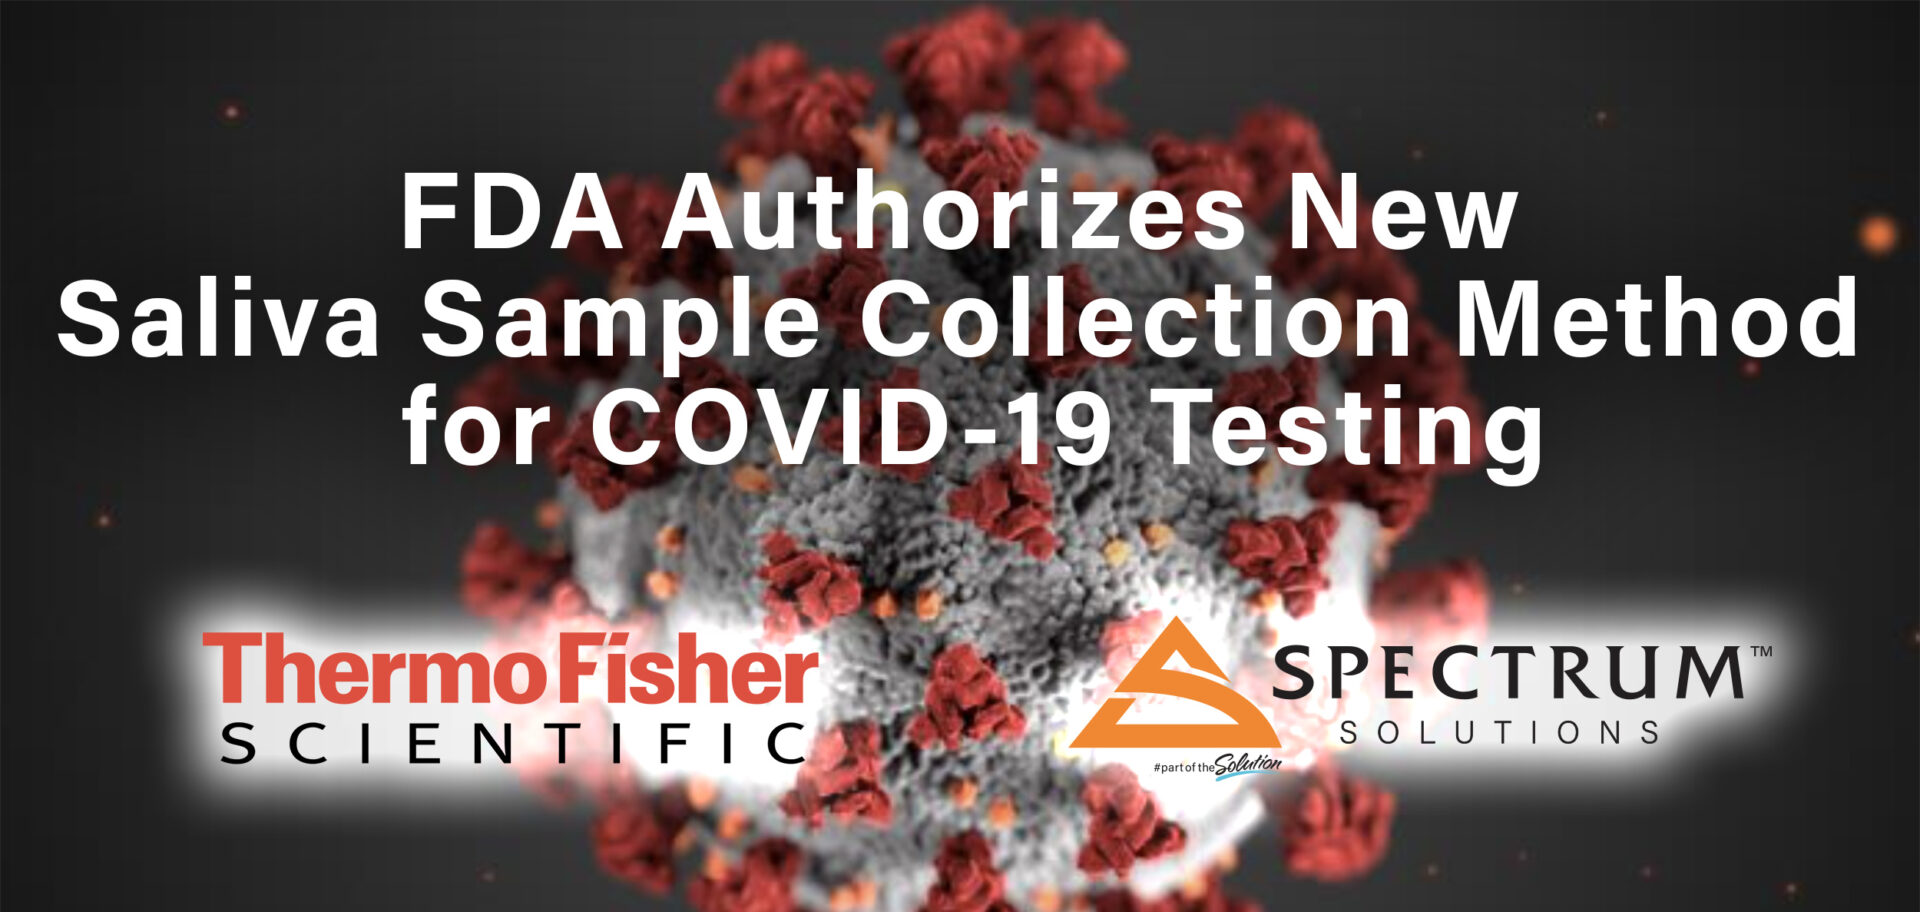 FDA Authorizes New Saliva Sample Collection Method for COVID-19 Testing